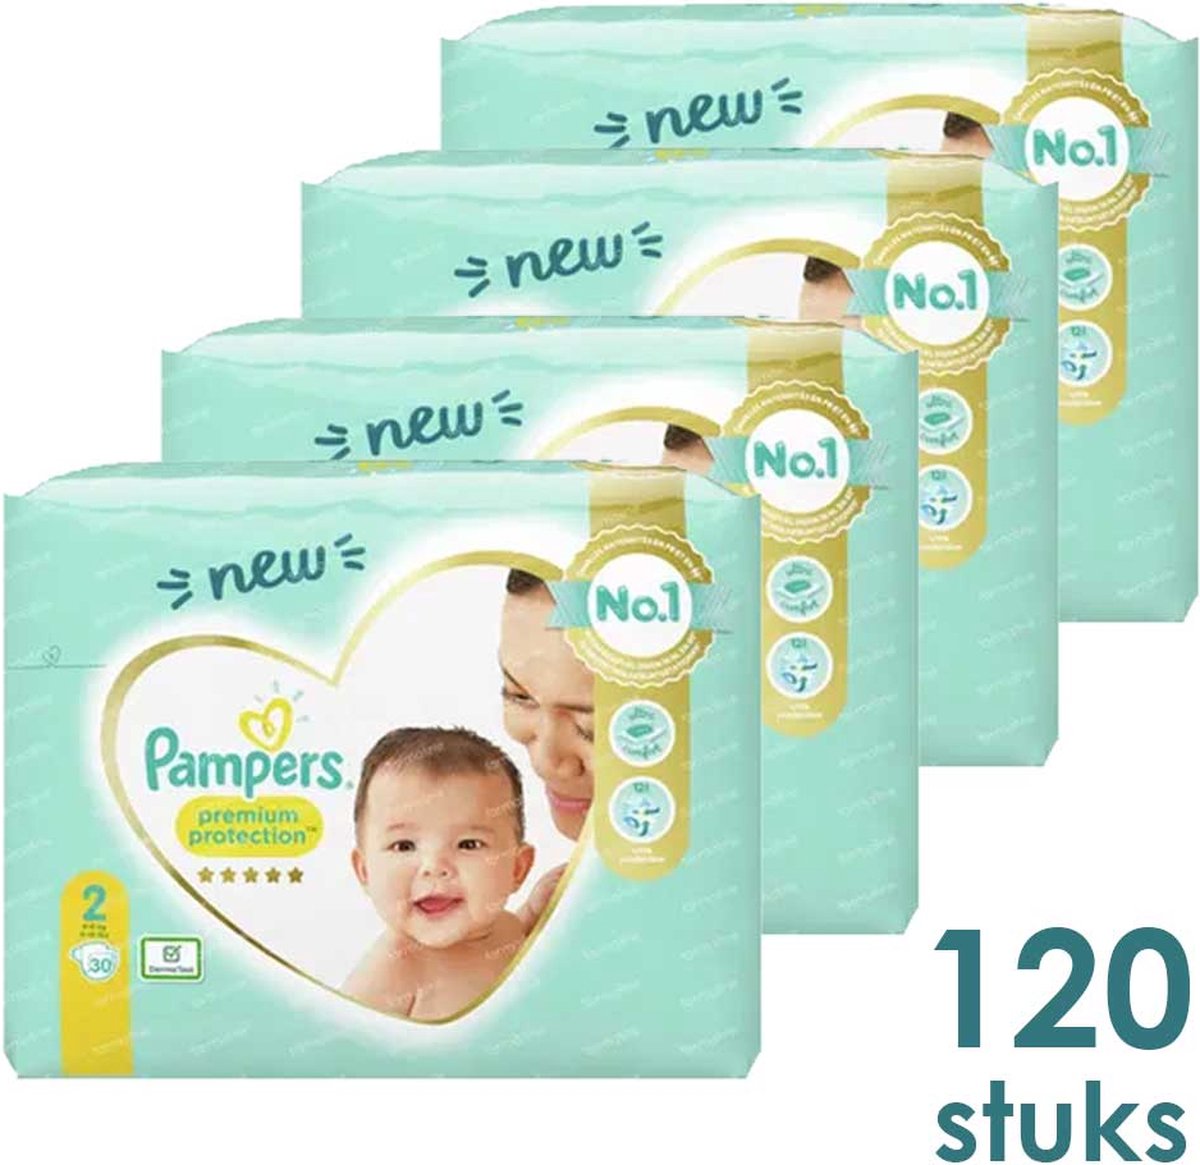 Pampers Premium Protection Taille 4, 60 couches, 9kg -14kg, Paquet